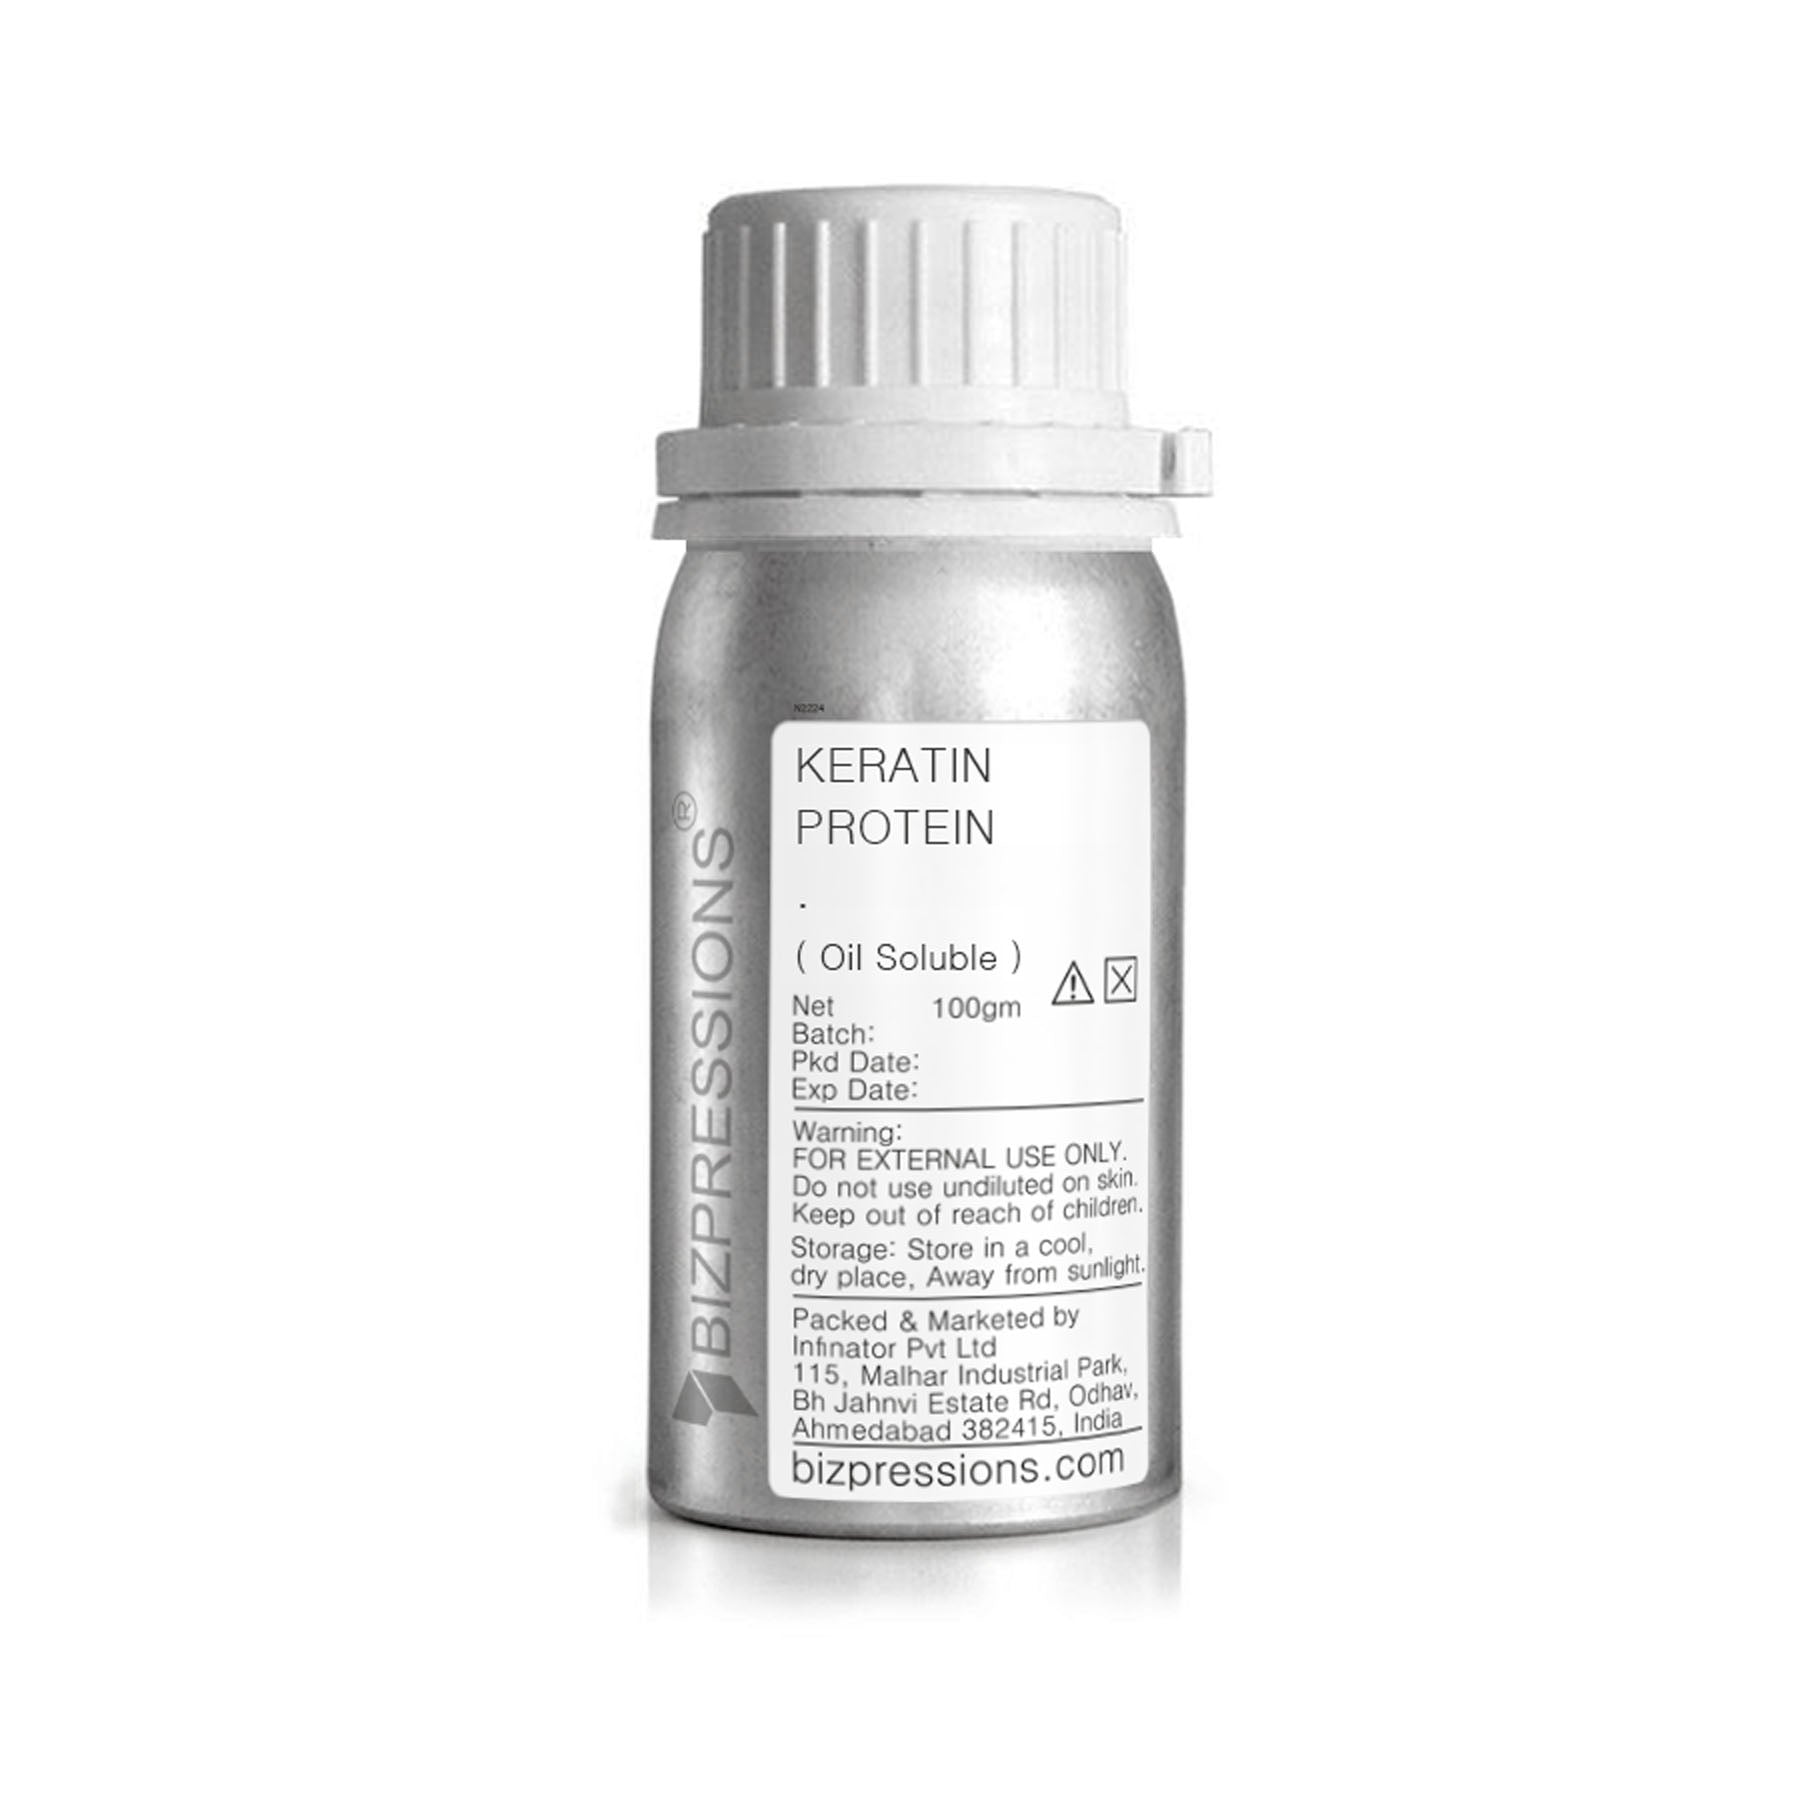 KERATIN PROTEIN - Fragrance ( Oil Soluble ) - 100 gm